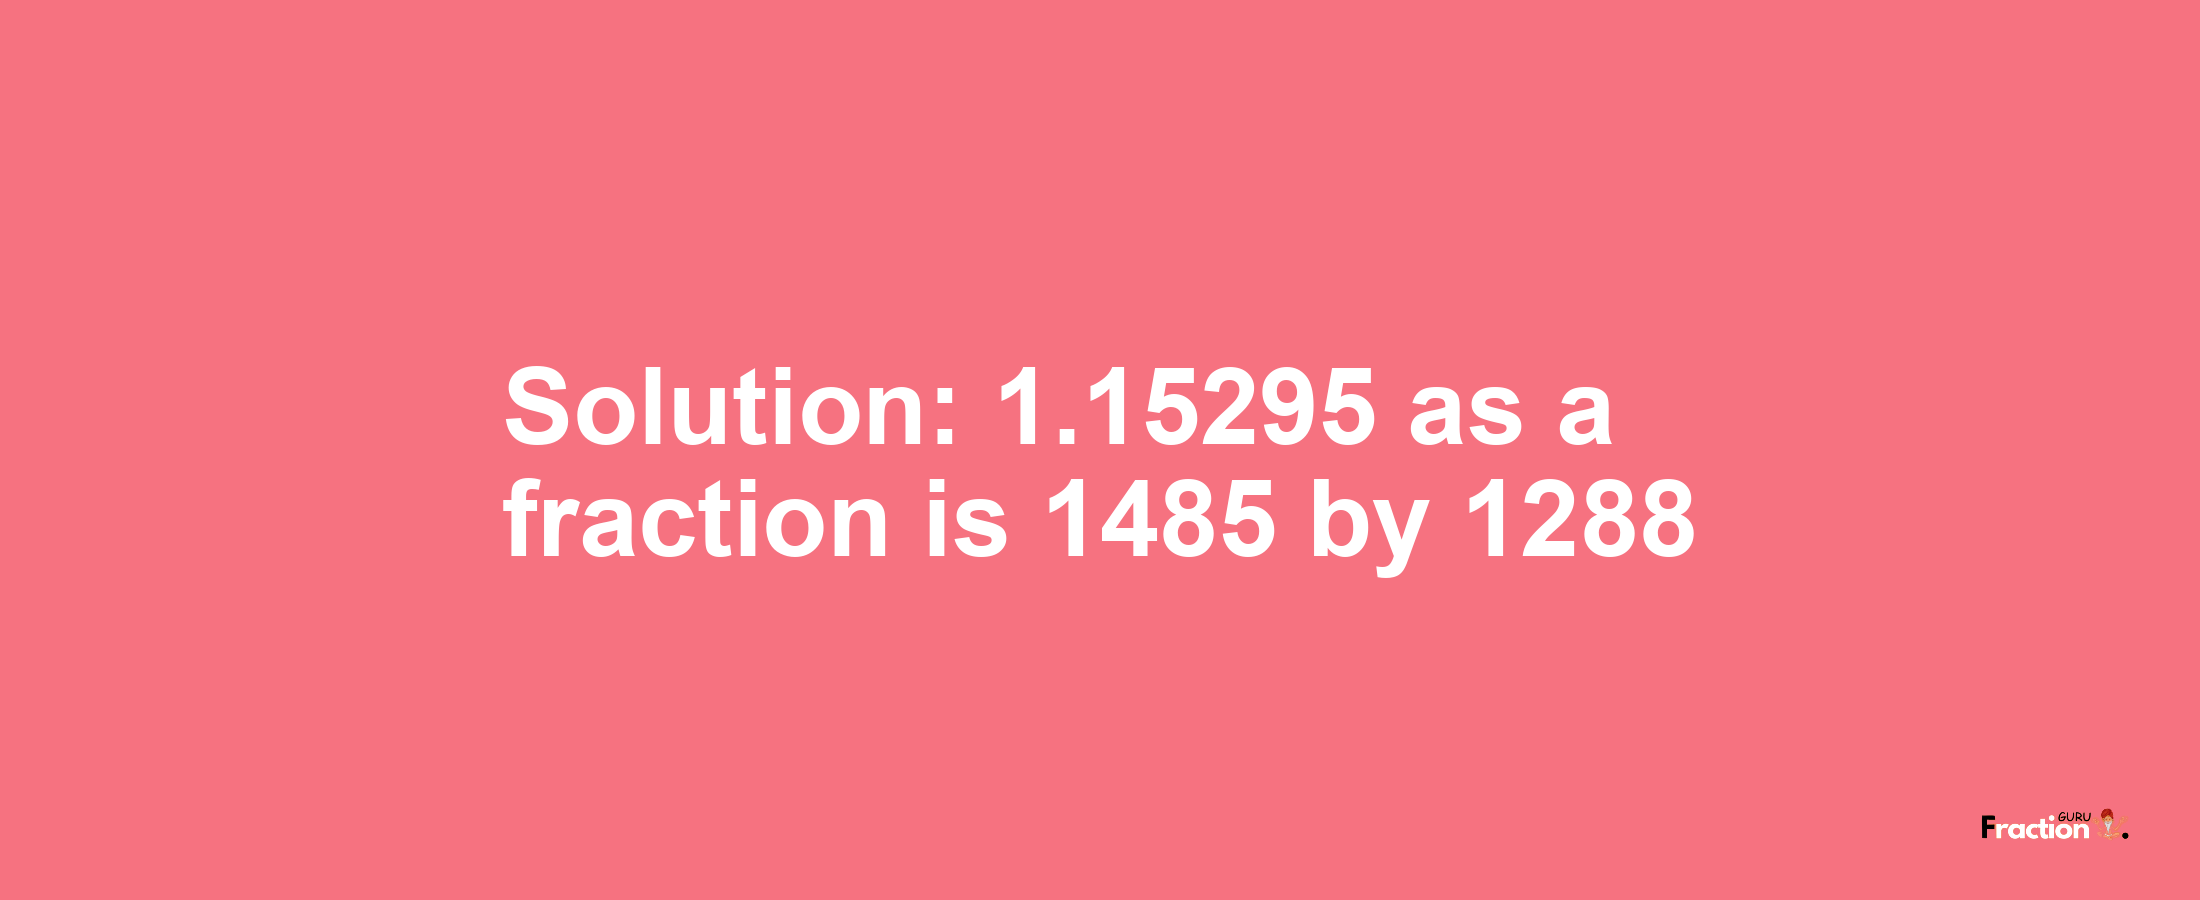 Solution:1.15295 as a fraction is 1485/1288